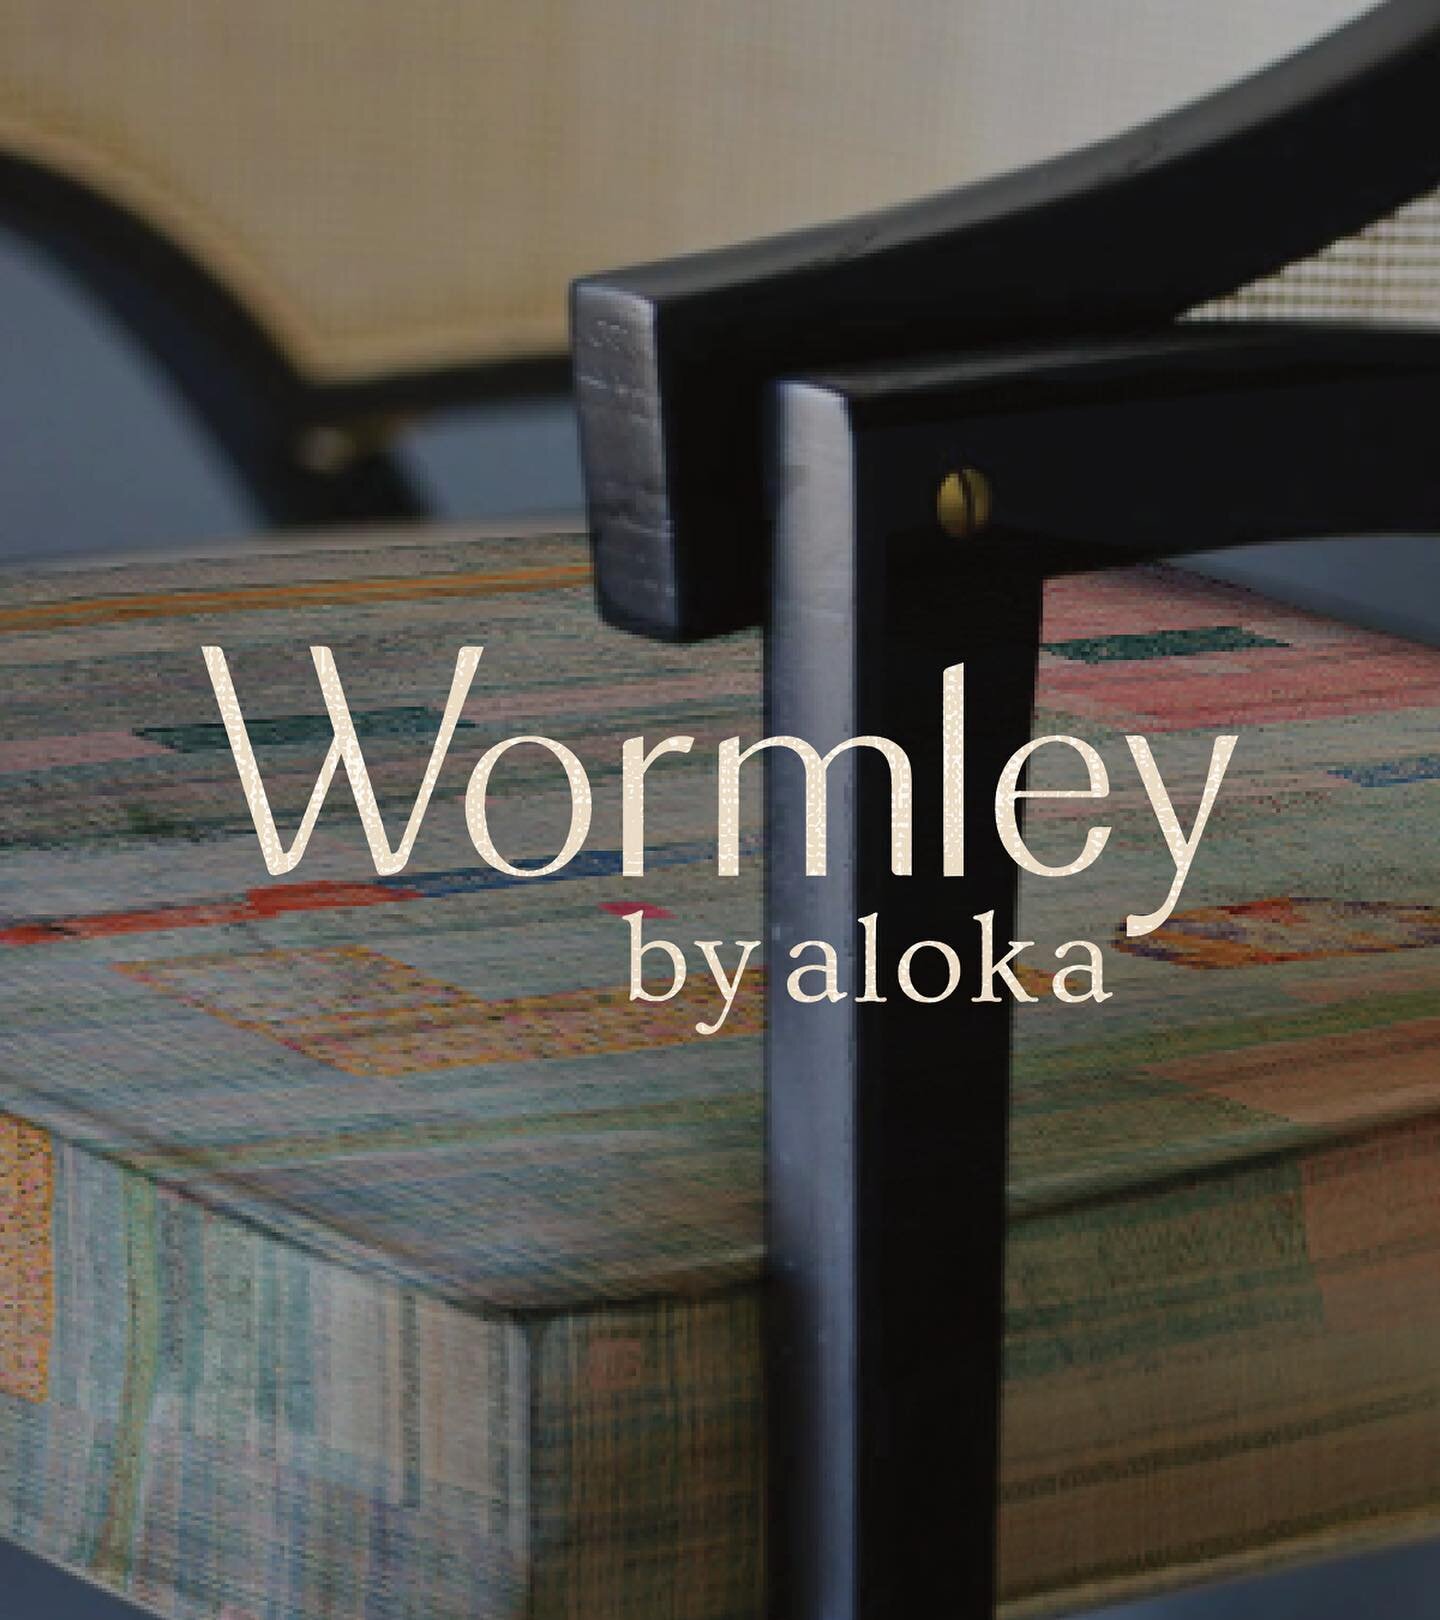 I&rsquo;m still coming down from the high of lending a hand to such an incredibly unique brand and finally being able to share about the branding process after keeping quiet for over a year!!

#WORMLEYbyaloka defines a new mood of the moment&mdash;hi